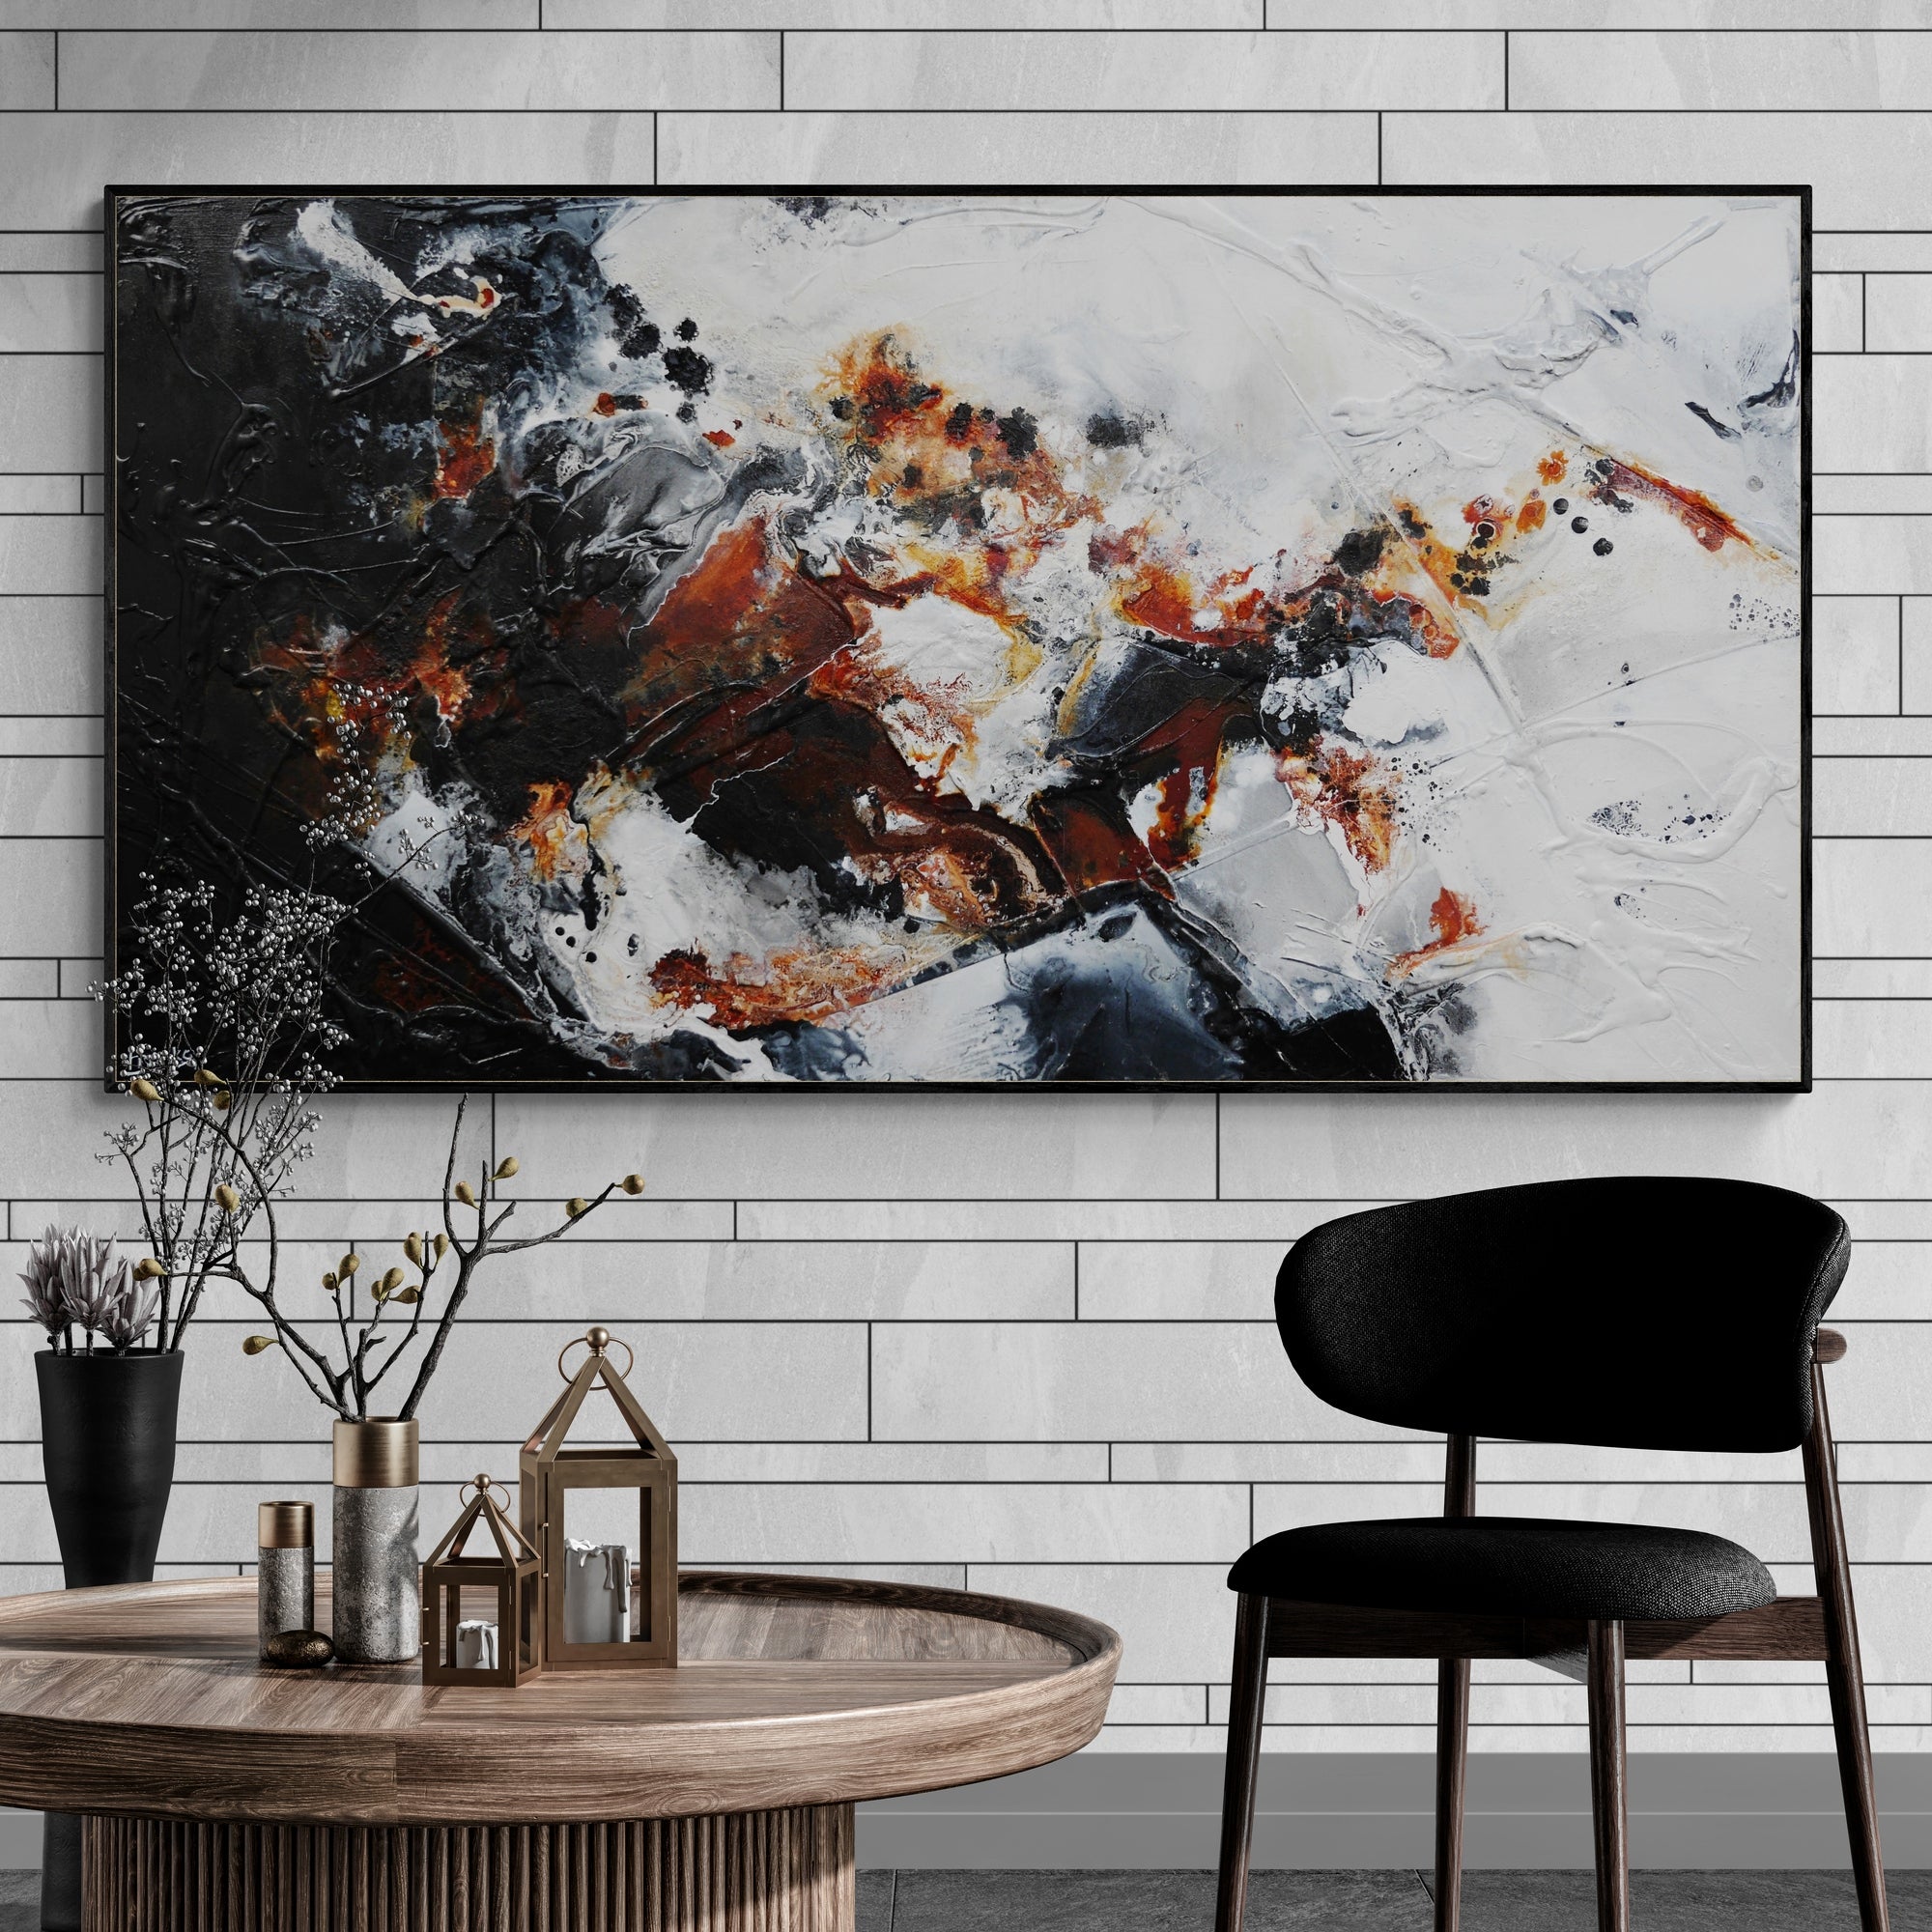 Roxide 190cm x 100cm Textured Abstract Painting (SOLD)